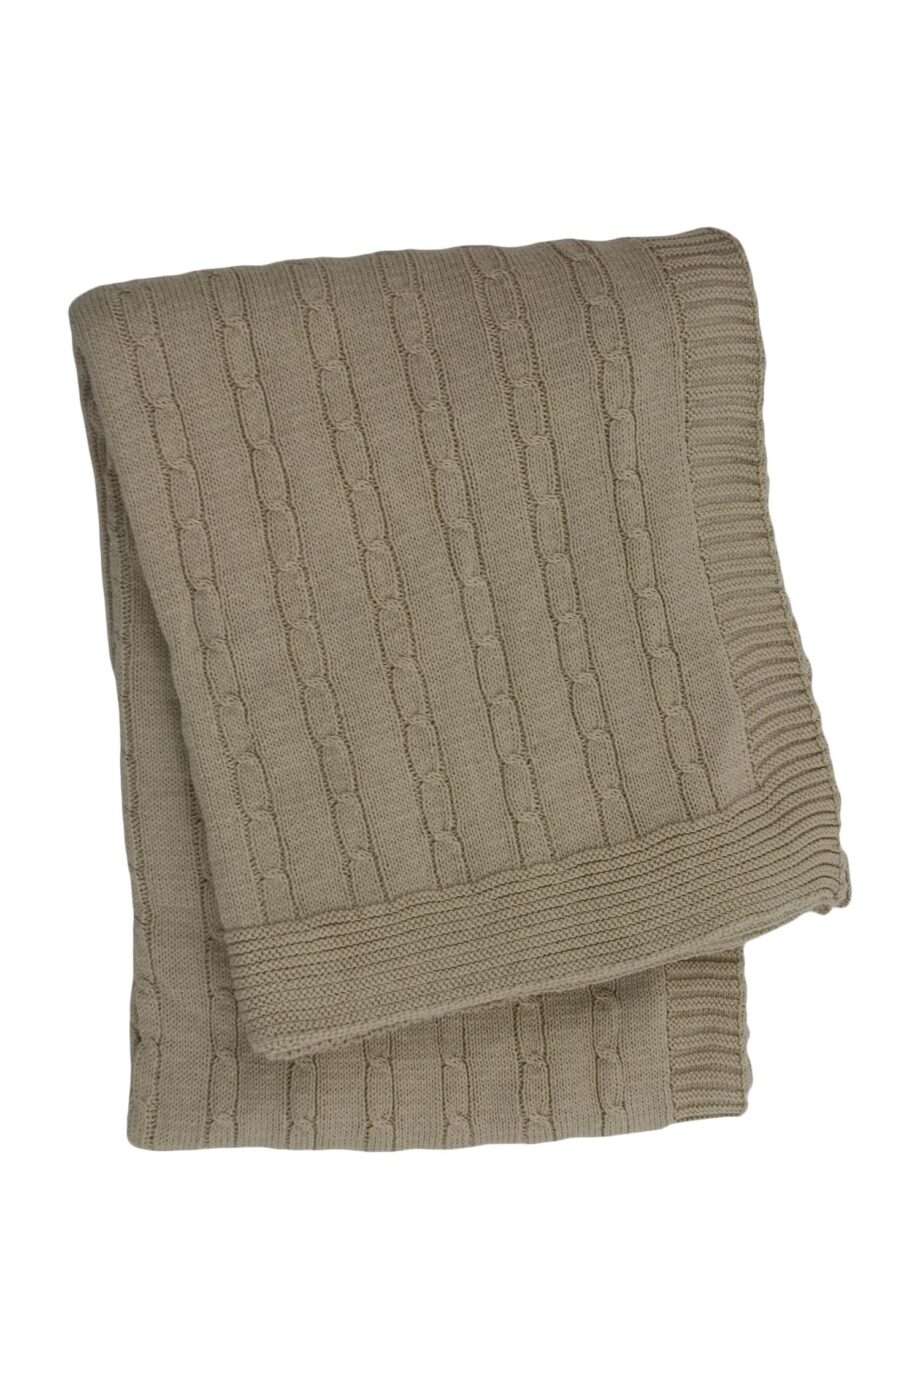 twist small latte knitted cotton little blanket small